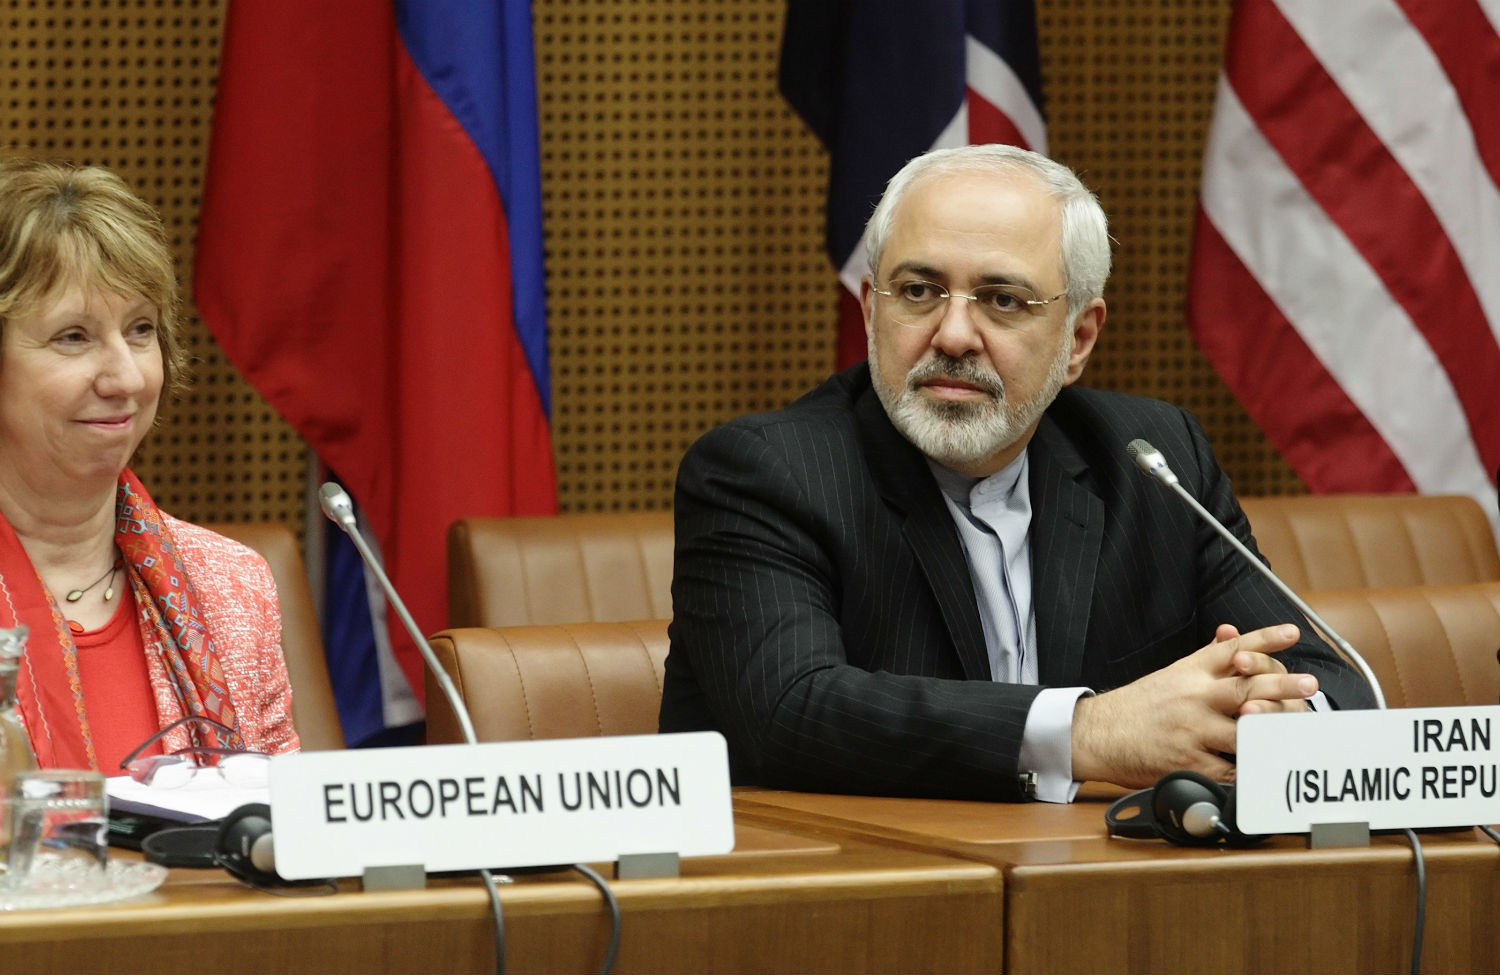 UANI President Gary Samore Dismisses Imminent Threat of an Iranian Nuclear Weapon